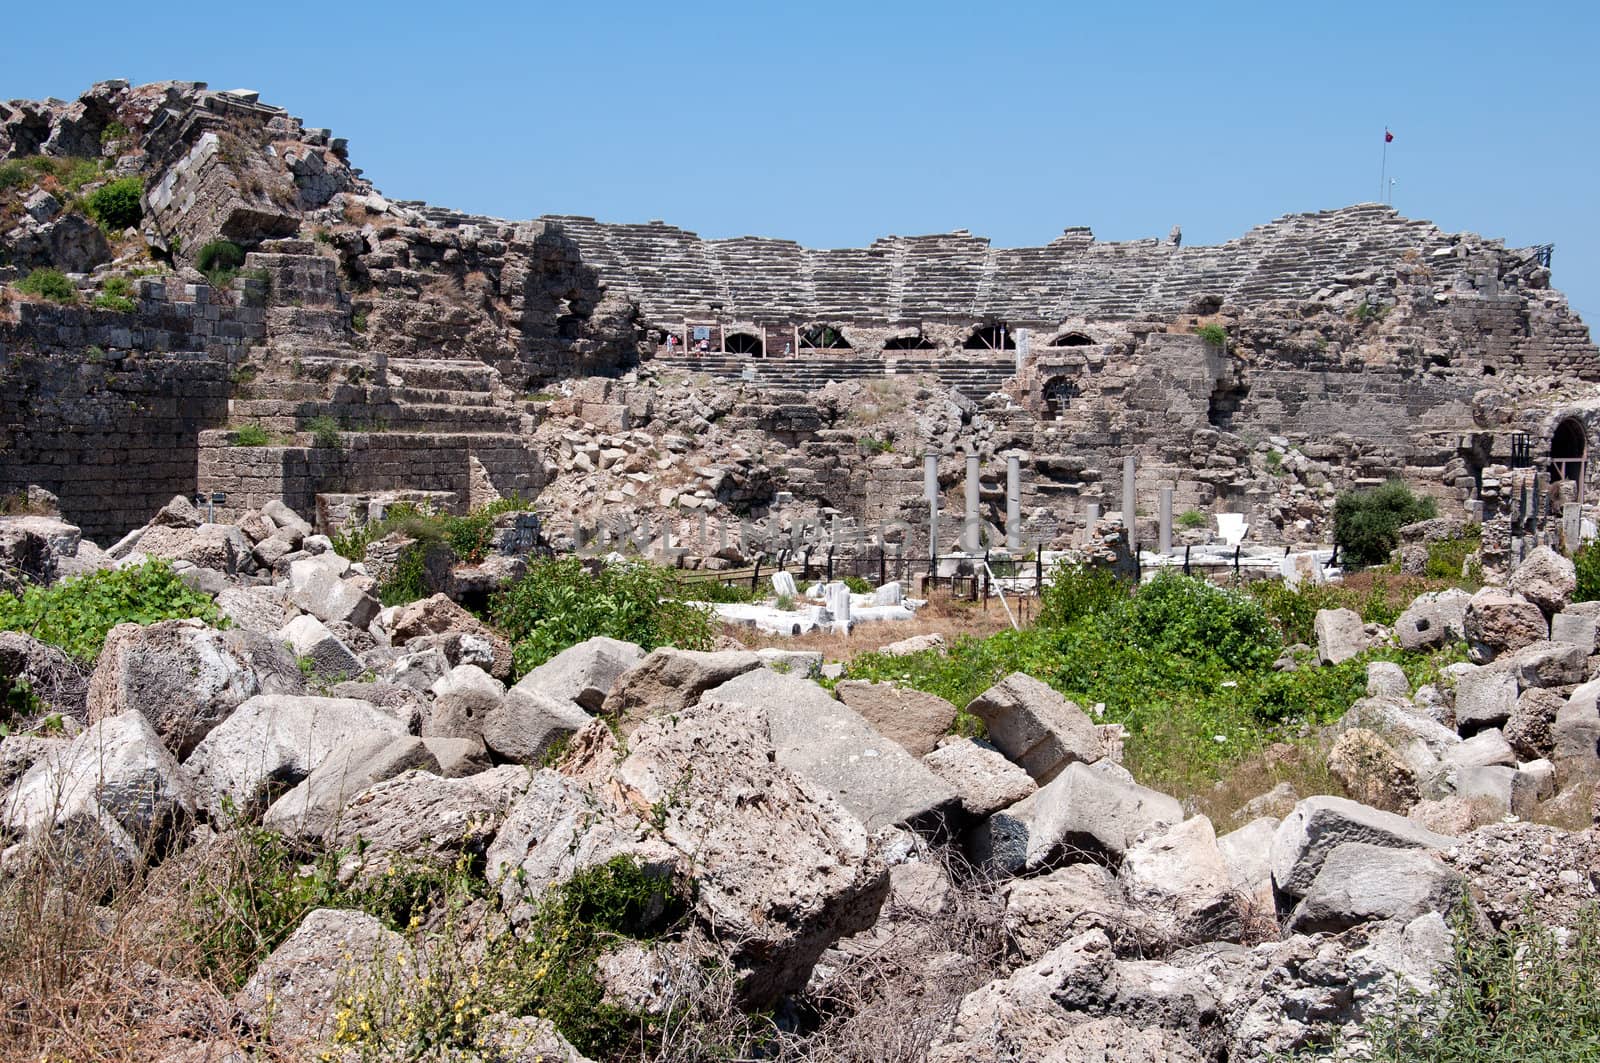 The ruins of the ancient amphitheater in Side, Turkey by olgavolodina